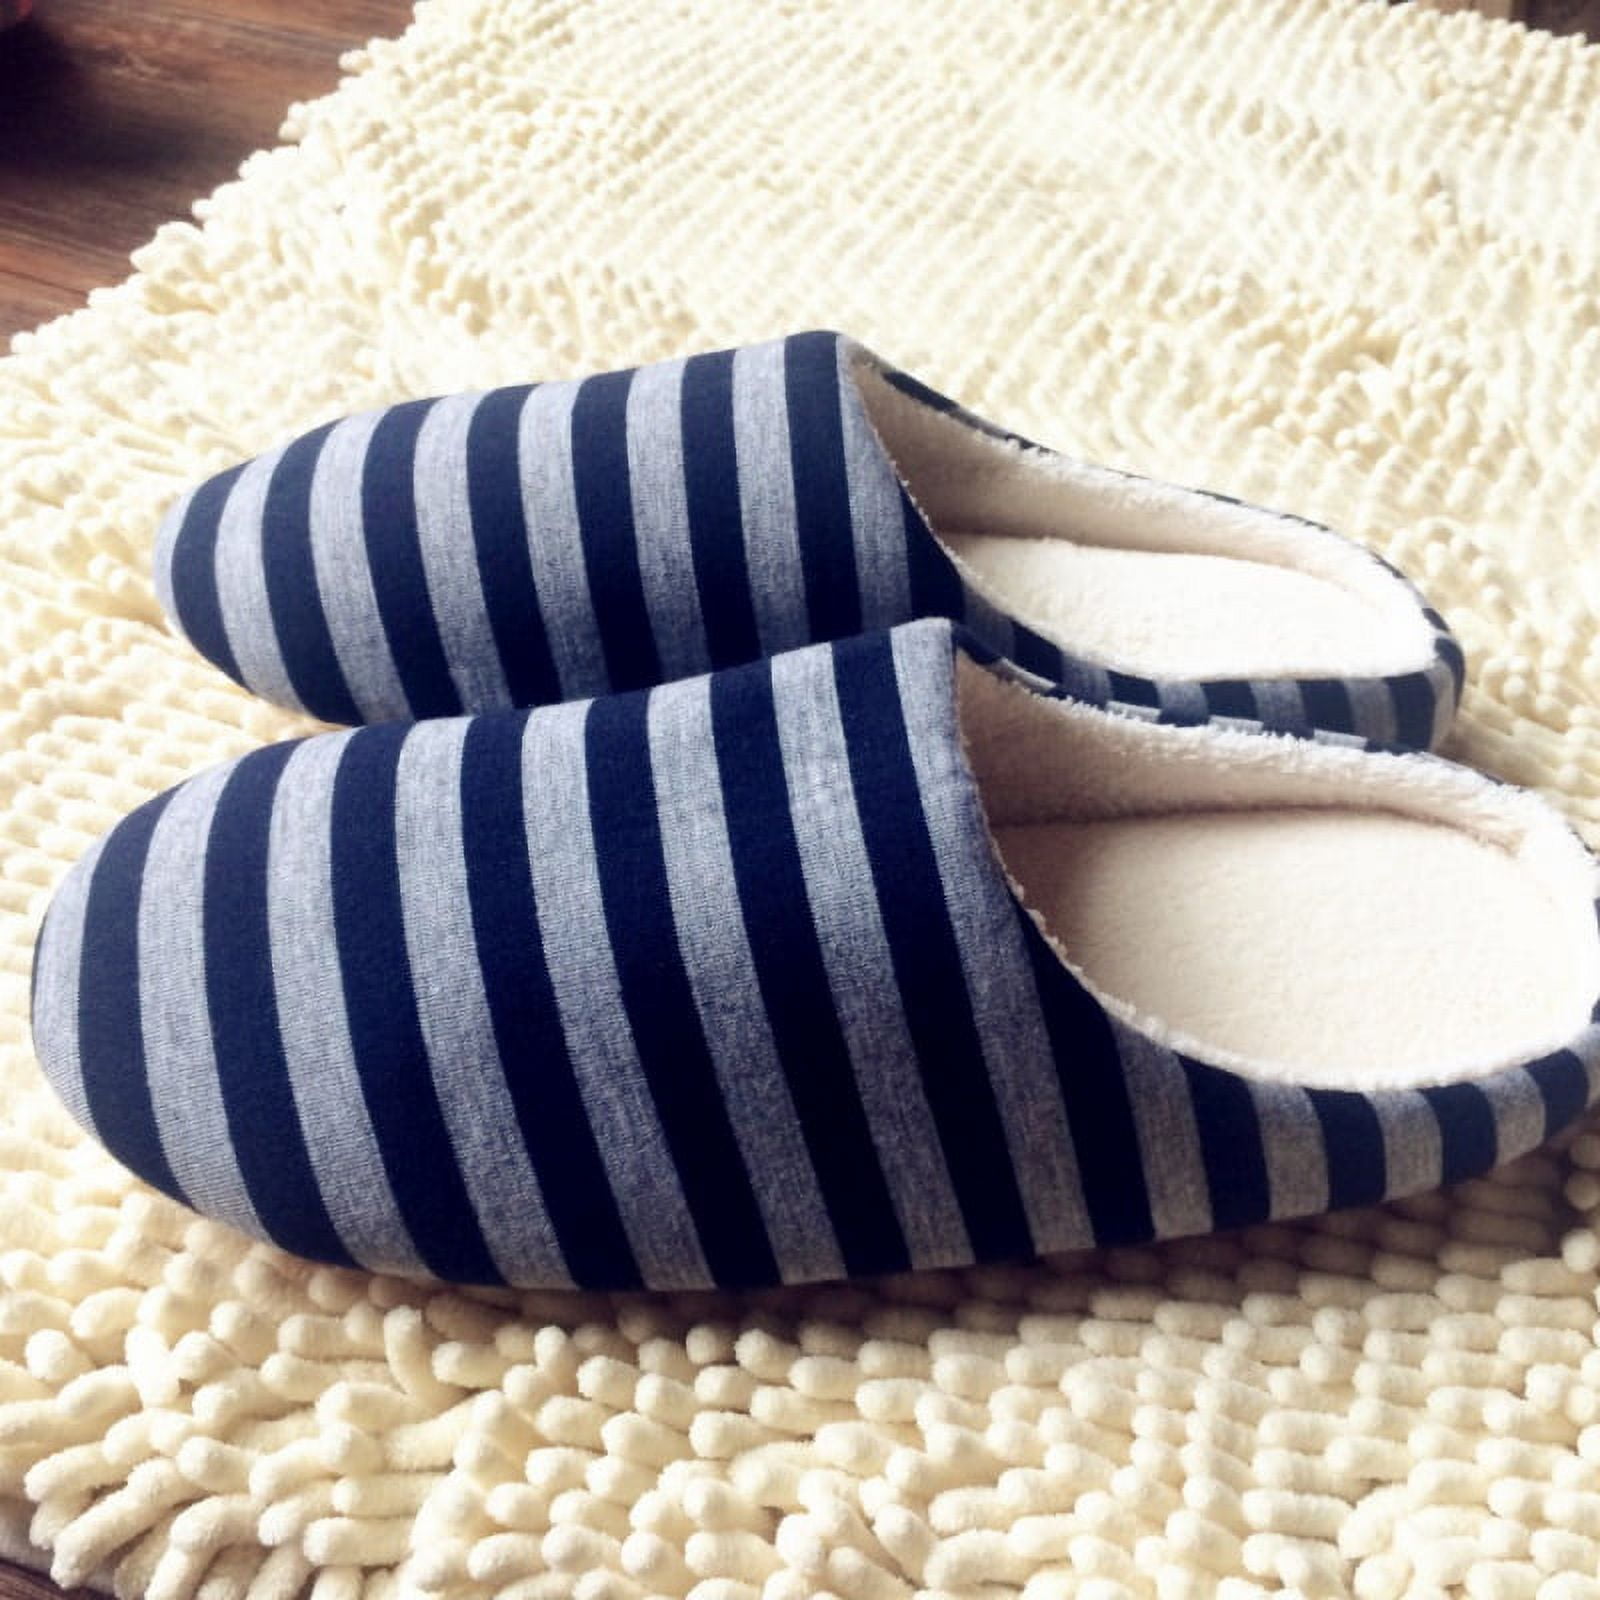 Women s Striped Memory Foam Slippers Cozy Slip House Slippers Comfy Bedroom Warm Soft Coral Velvet Lining Home Indoor Outdoor 624d0b1b f52c 4913 a98c 62607c7ad435.342f83f5a2c4cd4d9133bd086746d4b5